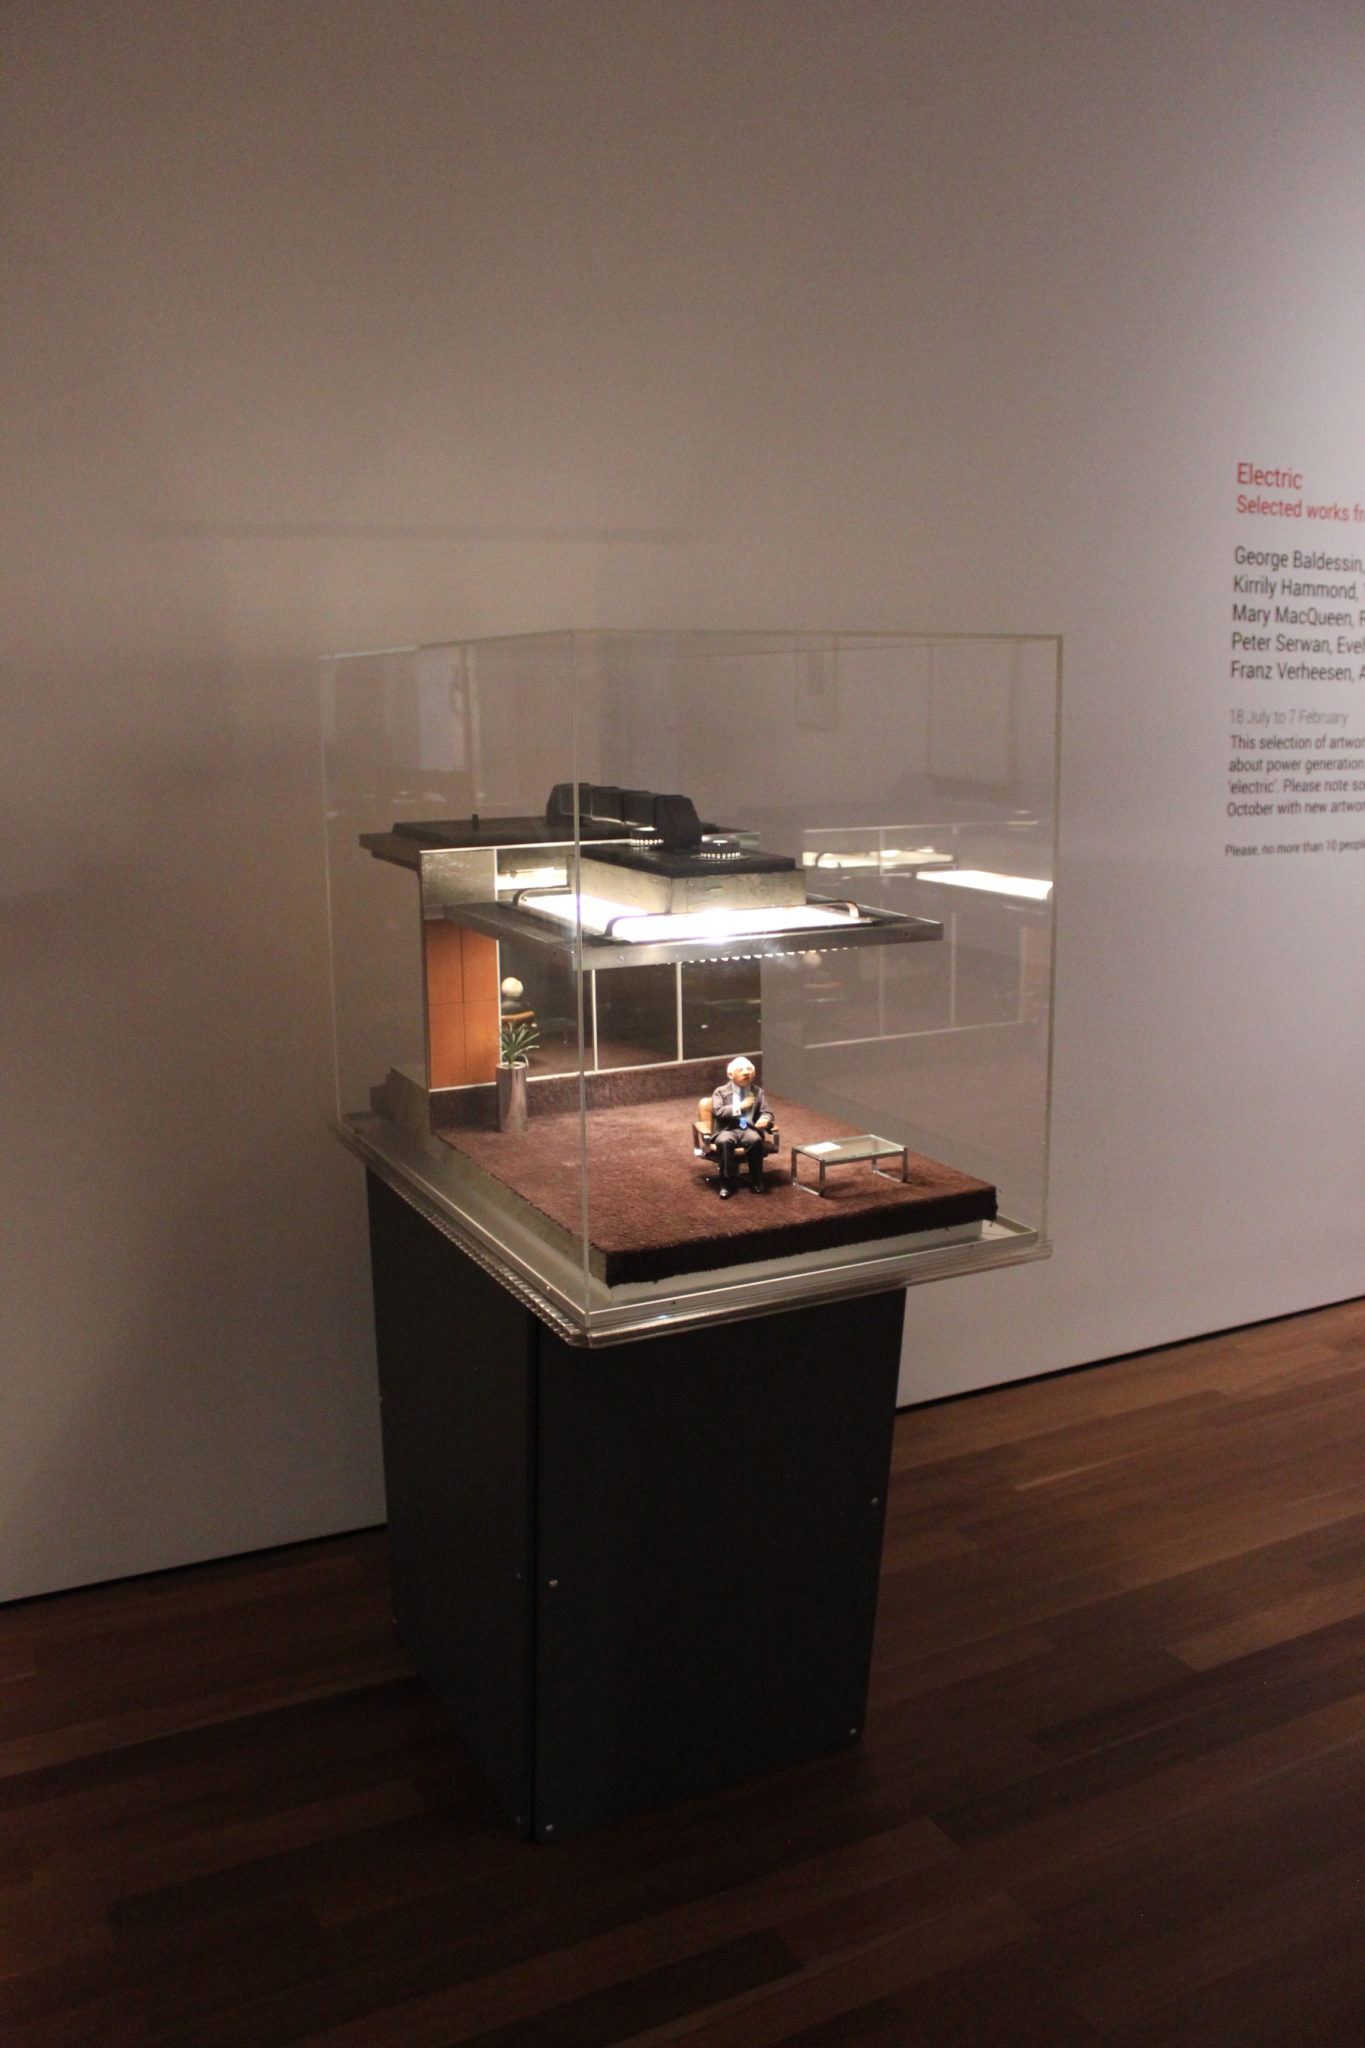 Colin Suggett, The $1000 Chair (kinetic), 1979, Mixed media including electrical components, 160 x 50 x 88 cm, Colin Suggett Collection, gift of the artist to Latrobe Regional Gallery, 2001.